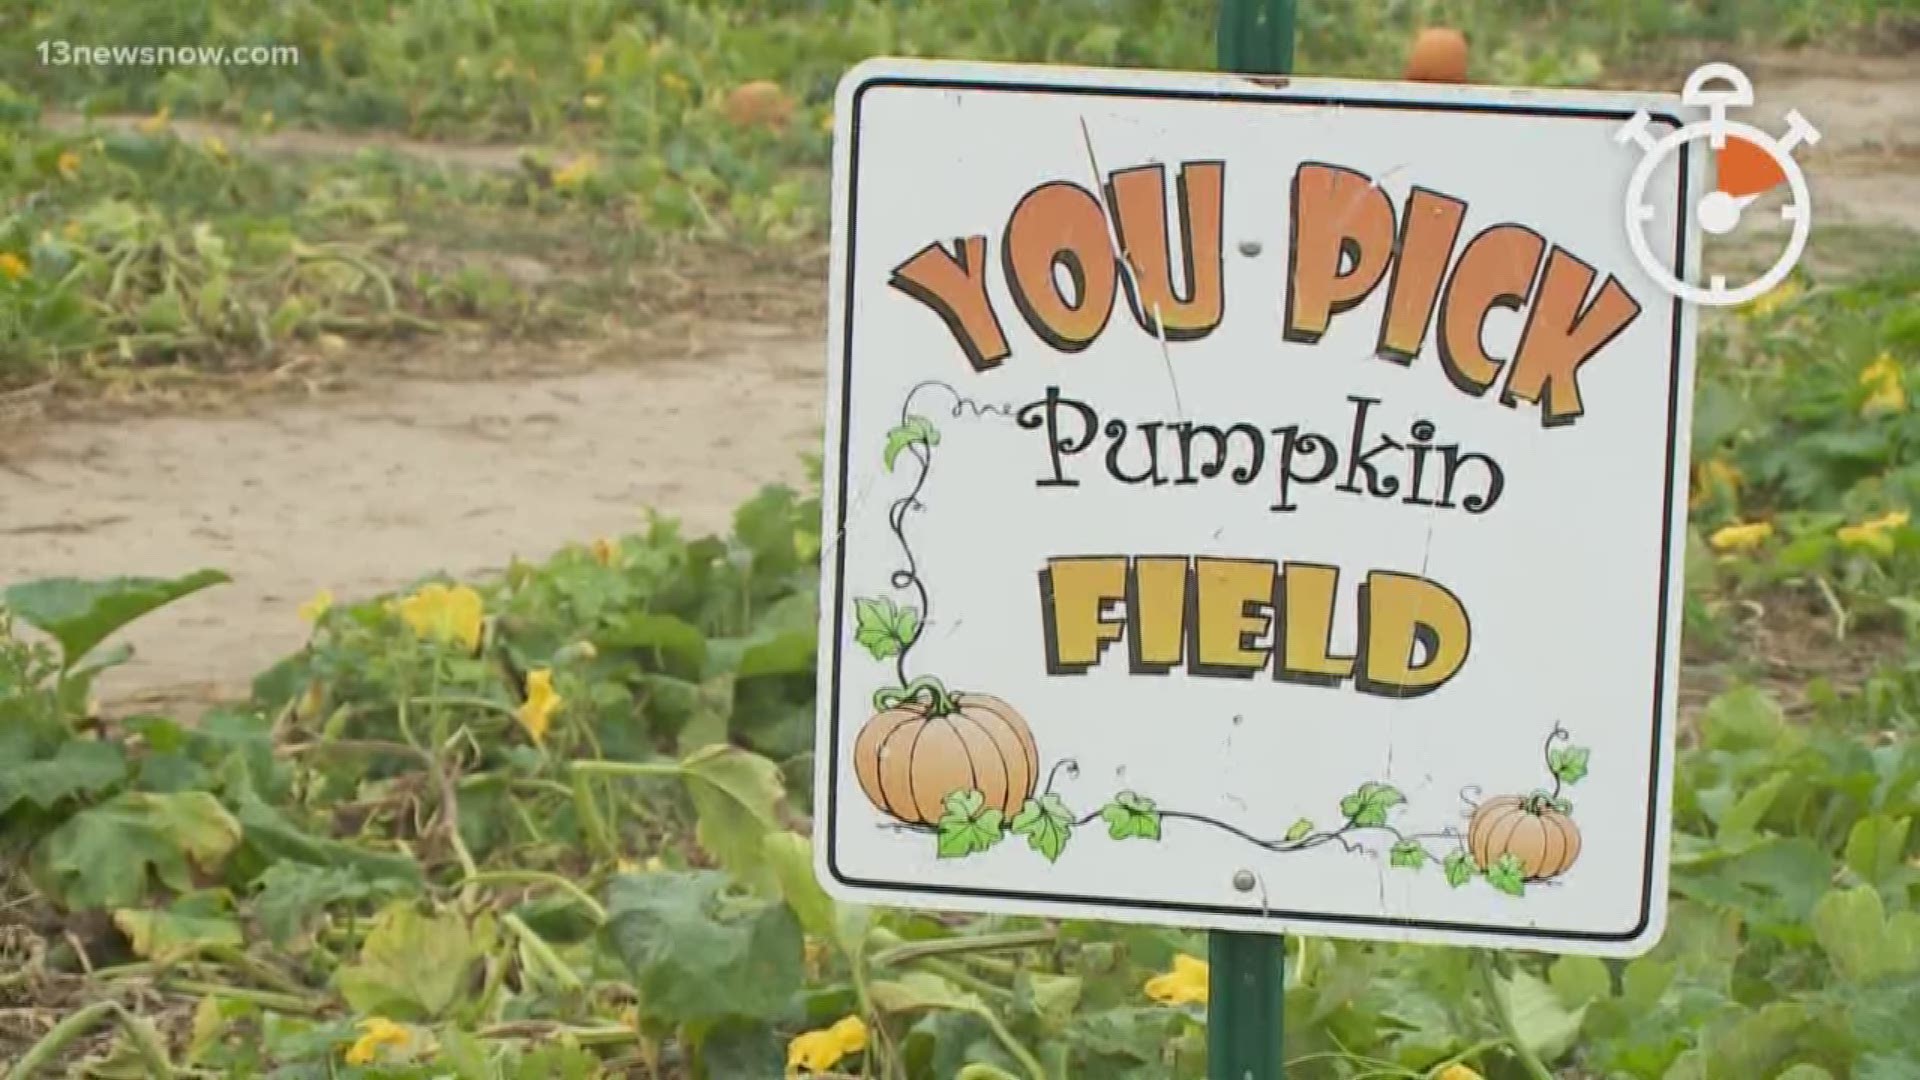 The owner of Cullipher Farms in Virginia Beach gave us some tips on how to find the perfect pumpkin.